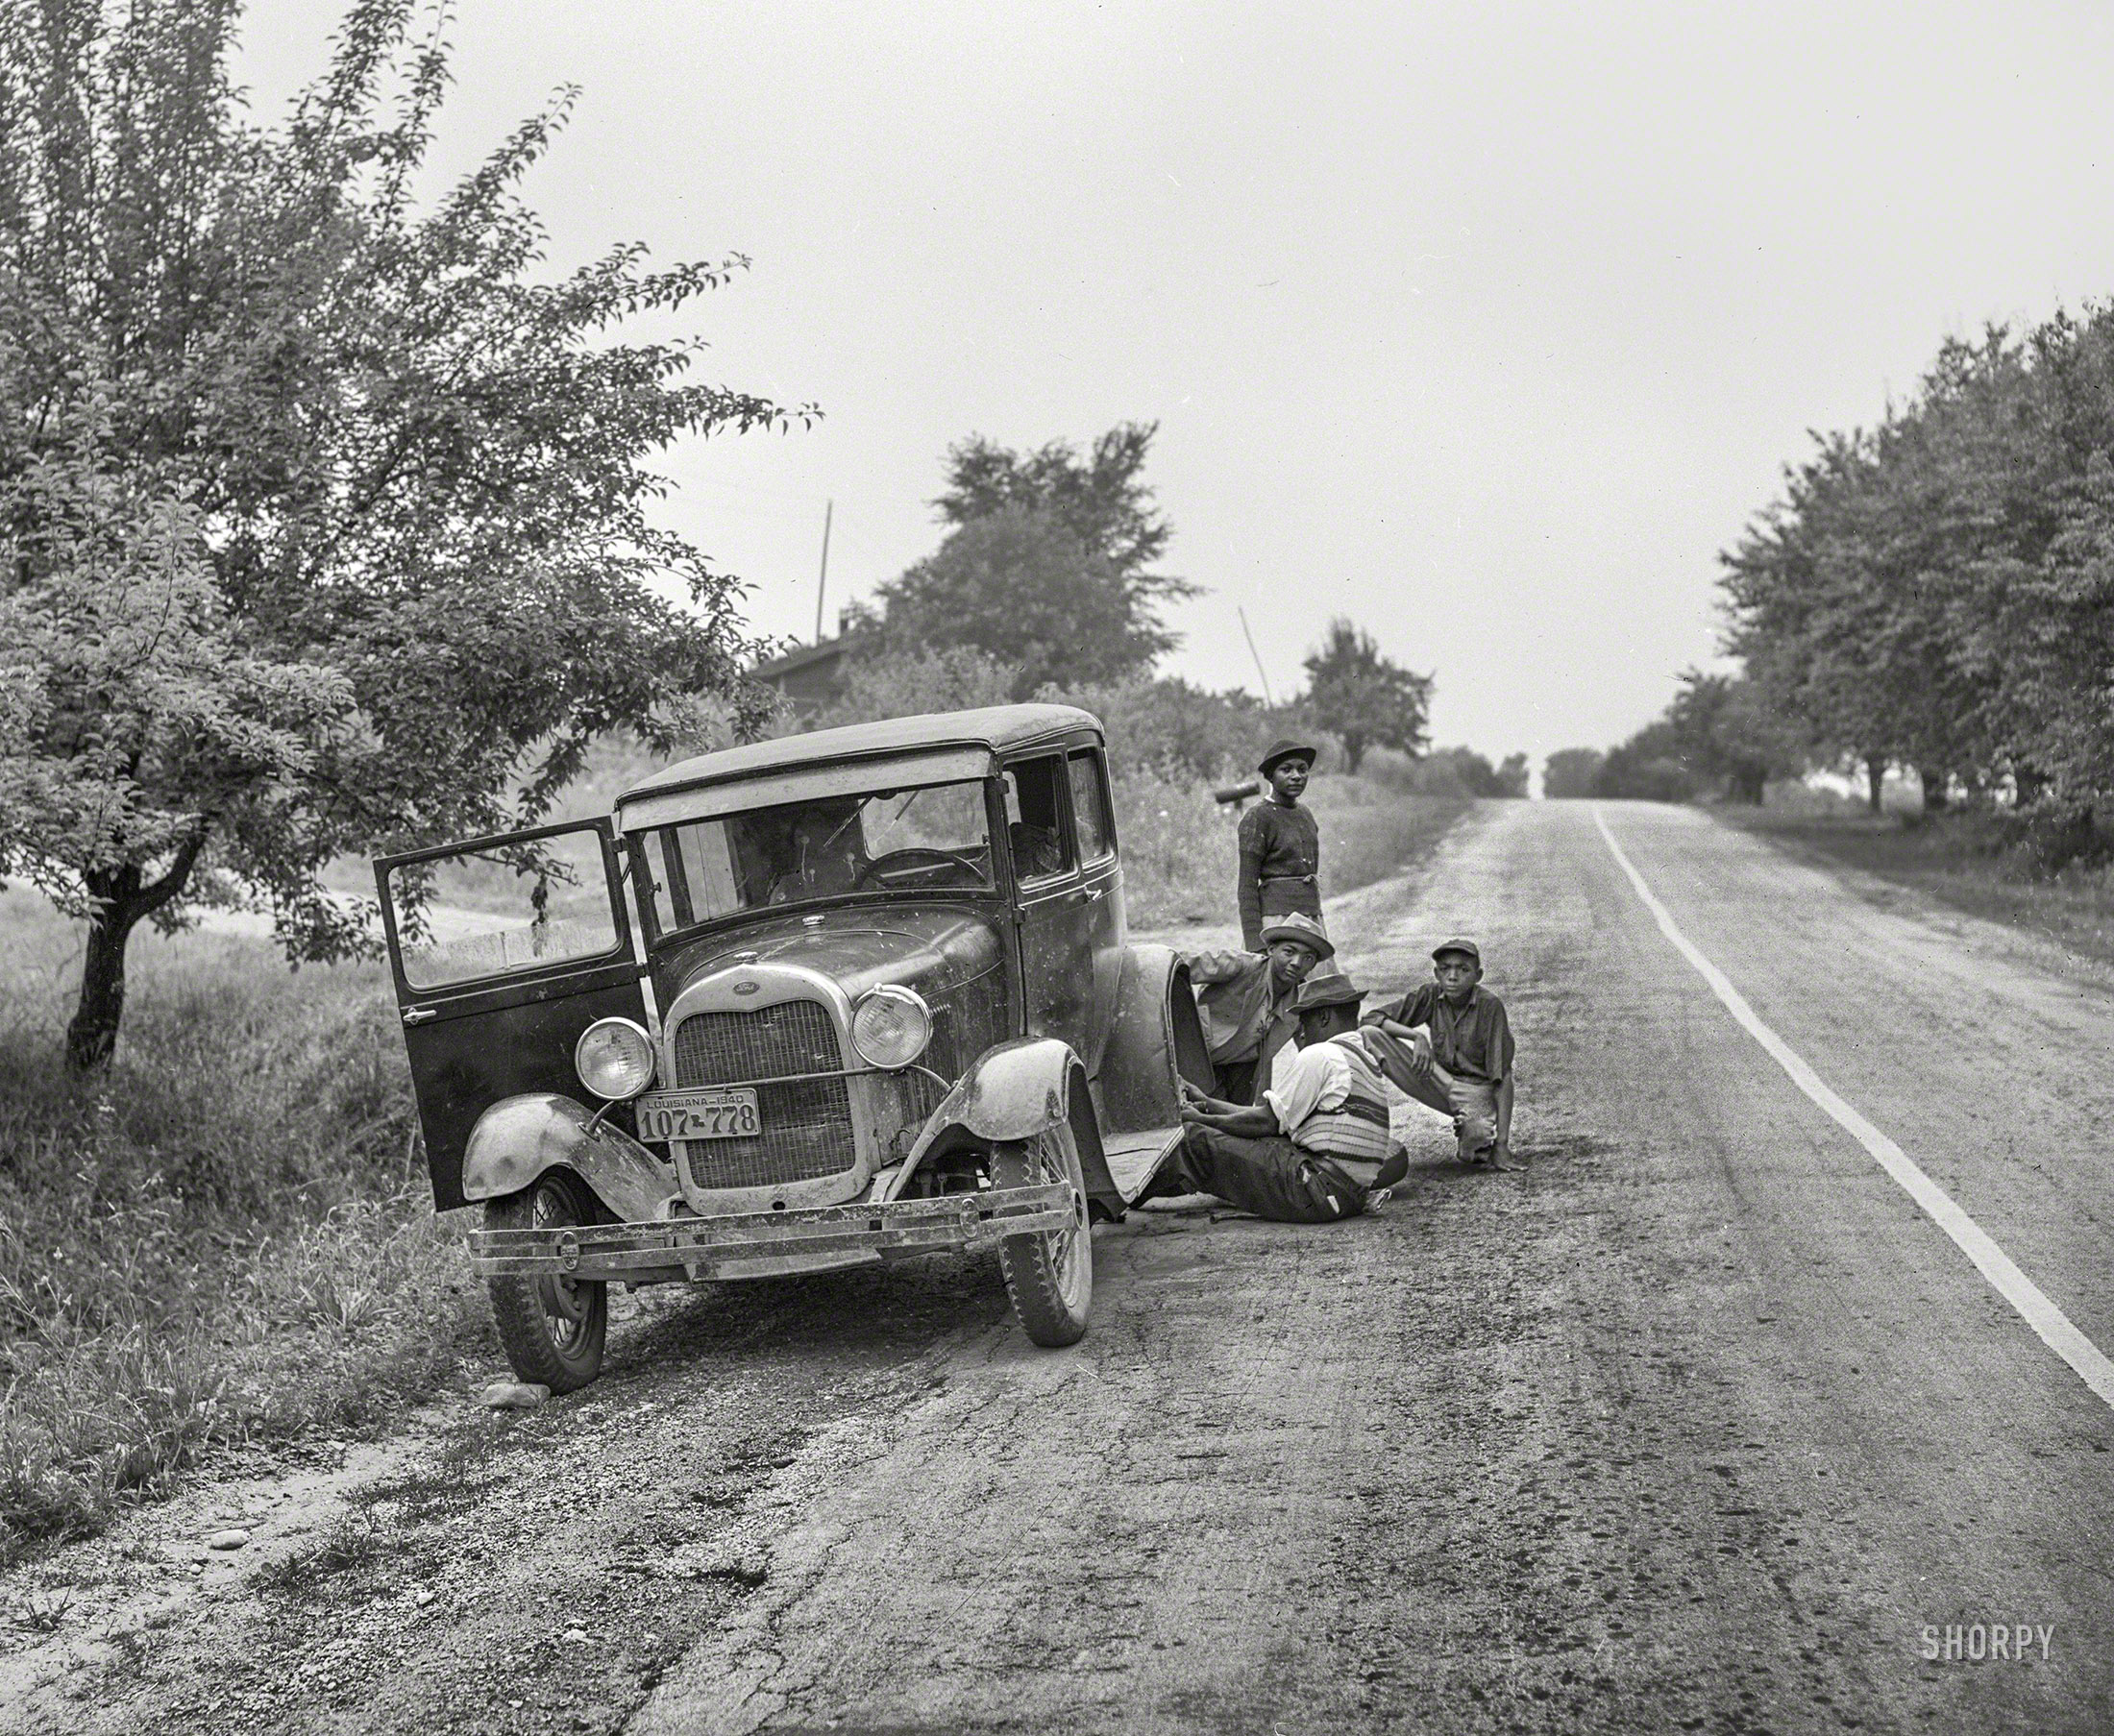 July 1940. "Migrant fruit workers from Louisiana fixing flat tire along the road. Berrien County, Michigan." Medium format acetate negative by John Vachon for the Farm Security Administration. View full size.